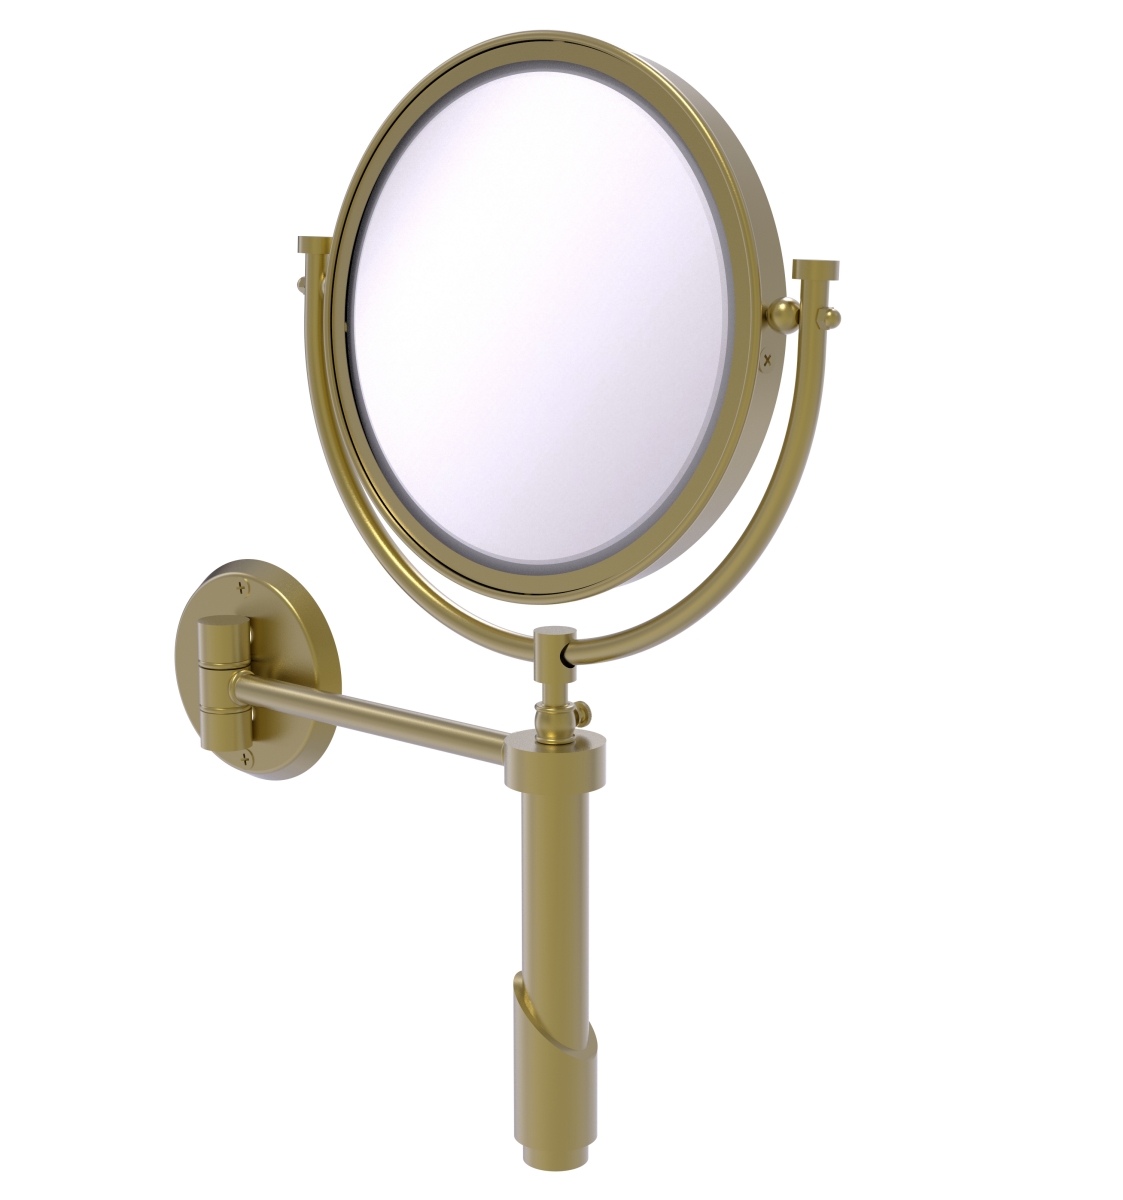 Allied Brass TRM-8-2X-SBR Tribecca Collection Wall Mounted Make-Up Mirror 8 in. Diameter with 2X Magnification, Satin Brass